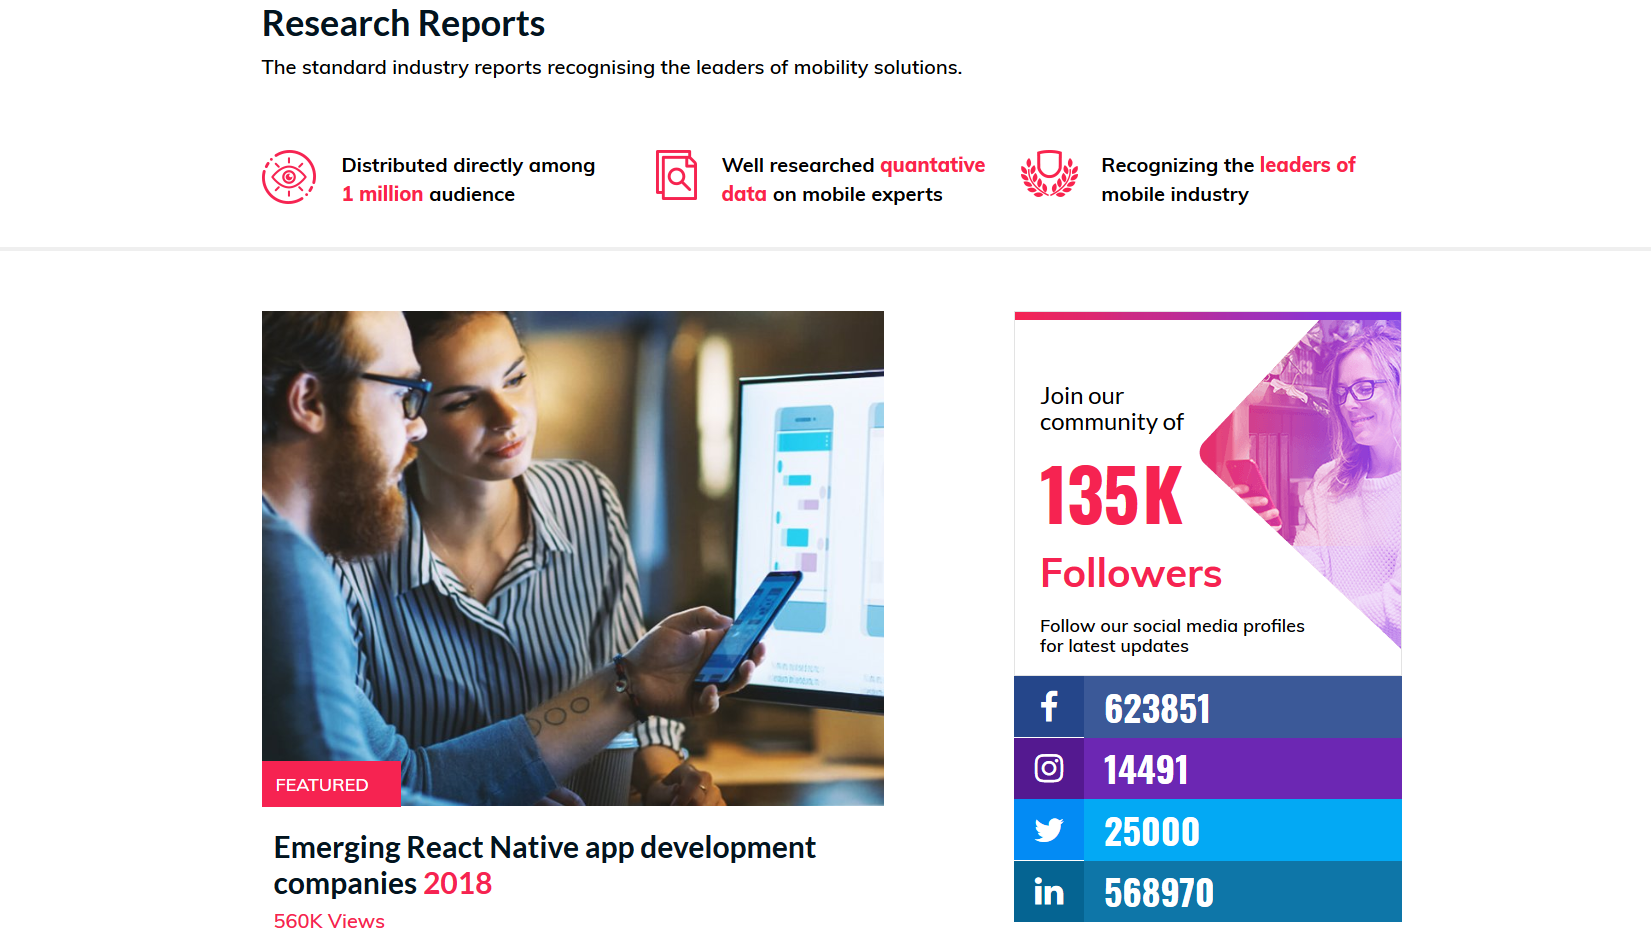 Latest Annual Reports | Top App Development Companies | MobileAppDaily